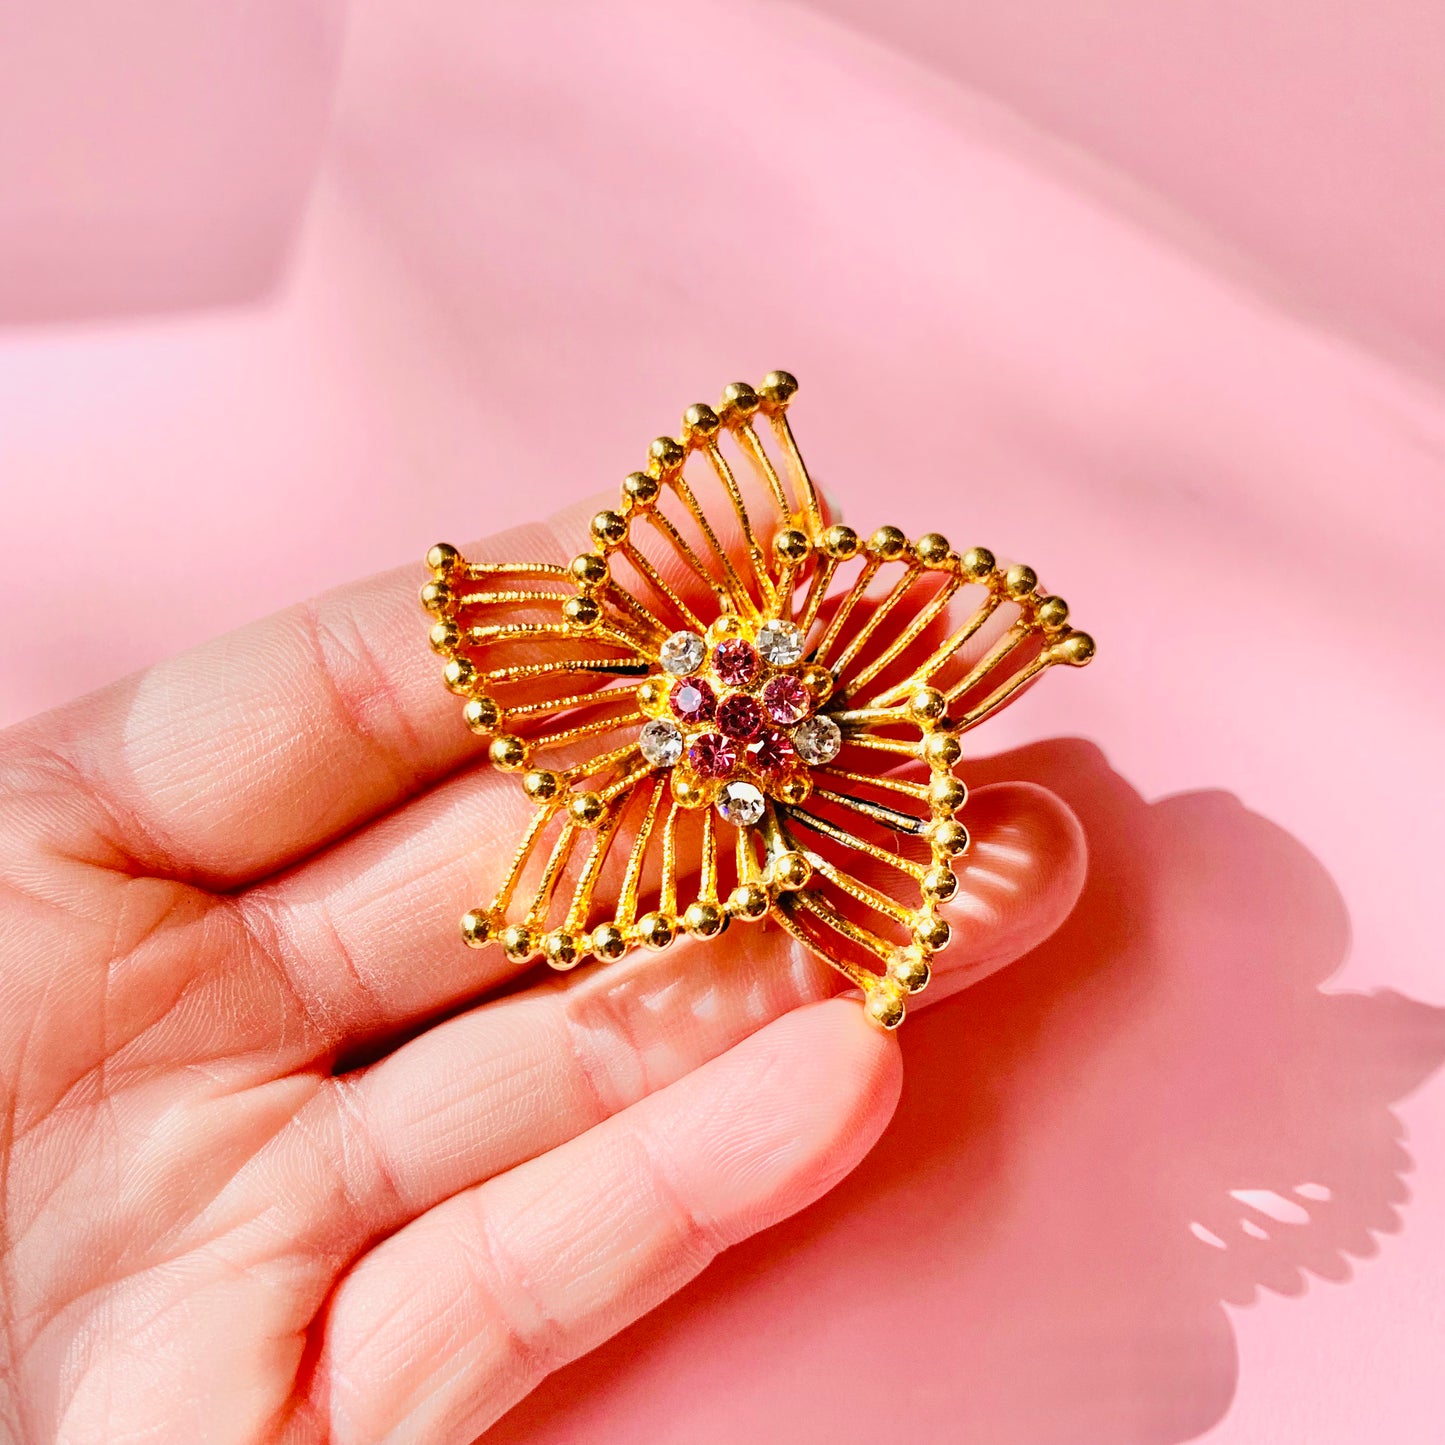 1960s gold plated alloy starburst brooch